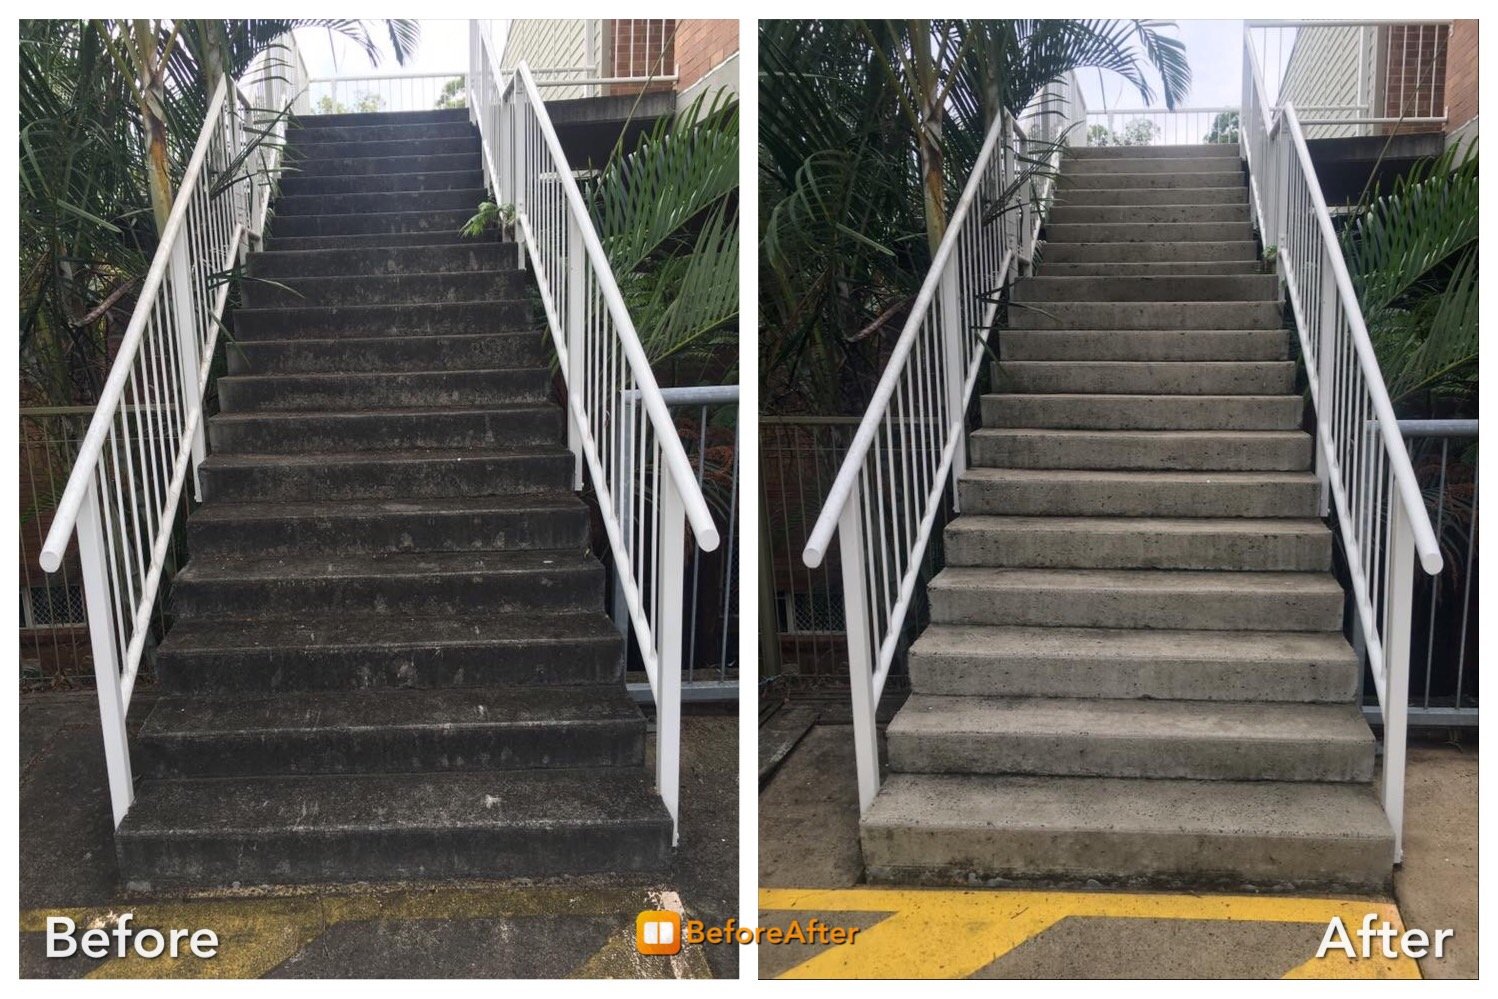 Before and after cleaning some concrete steps